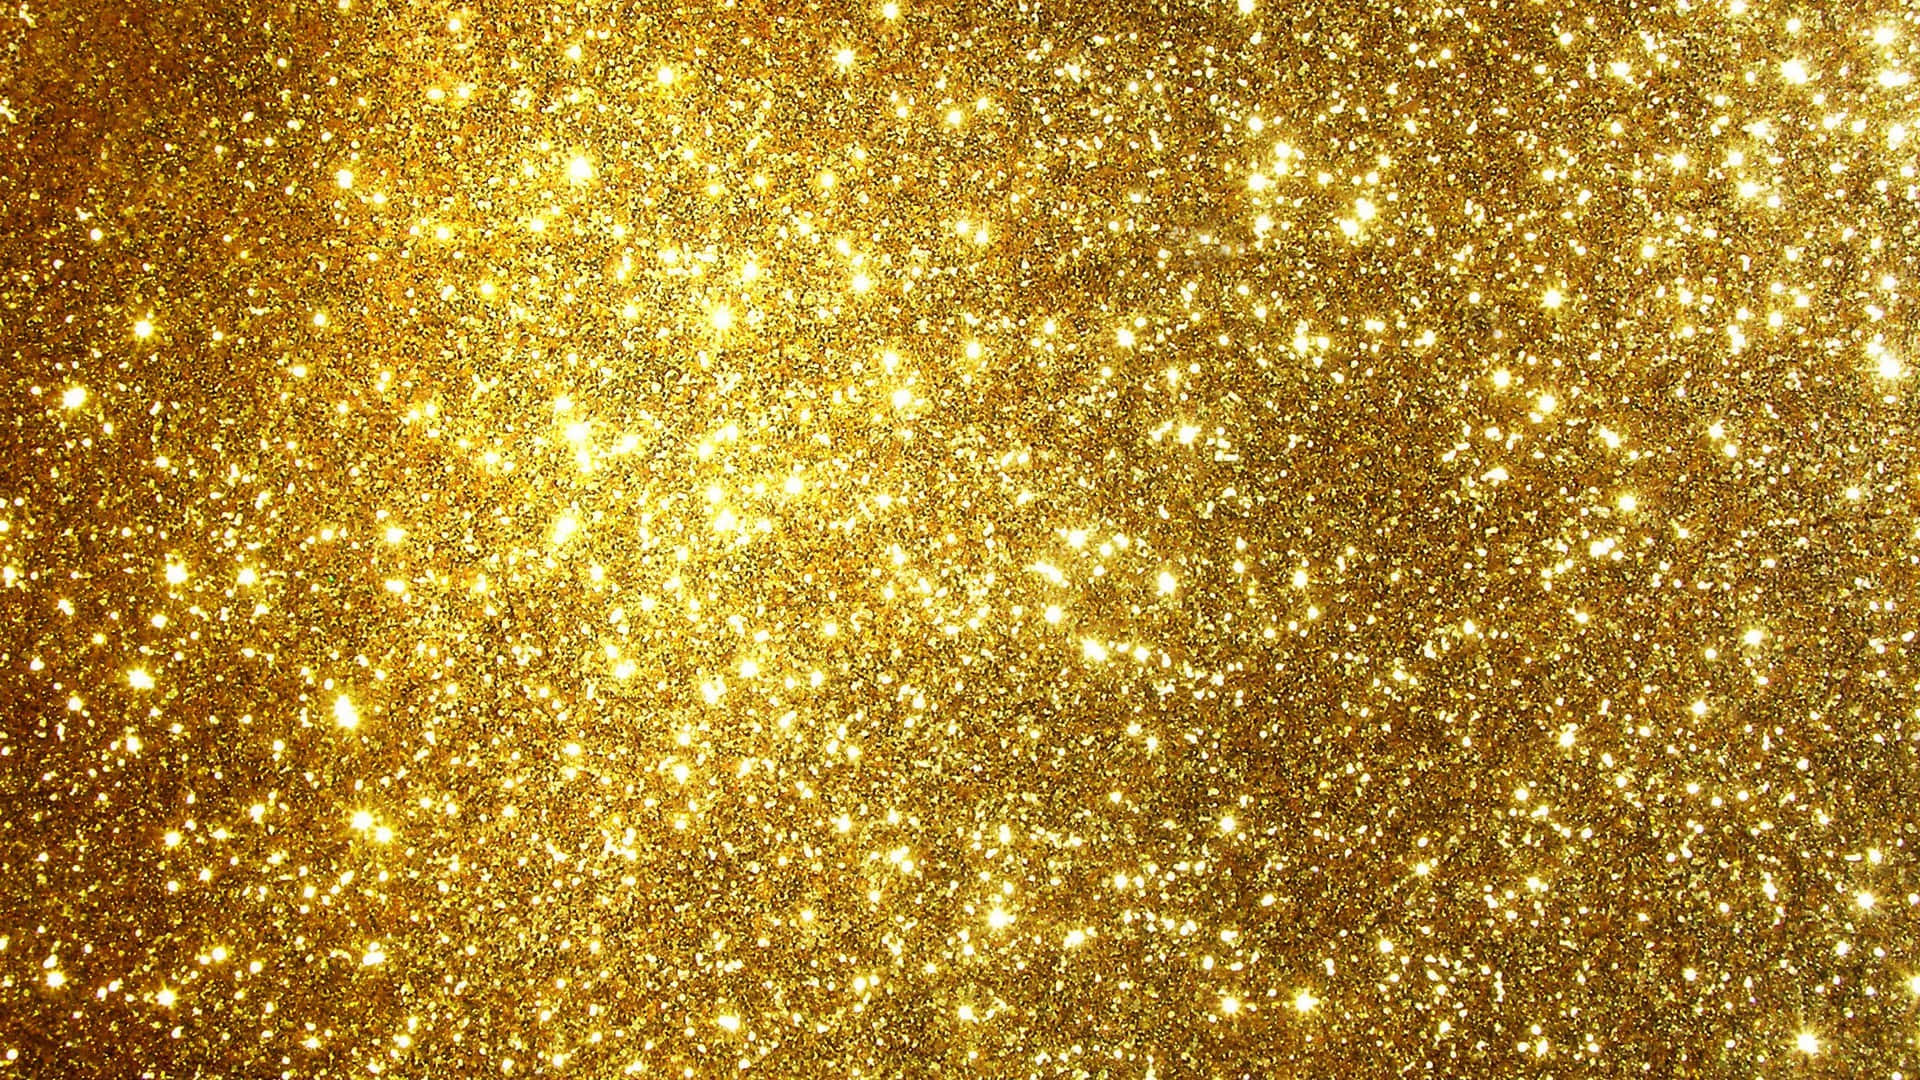 Add some sparkle to your life with Yellow Glitter Wallpaper